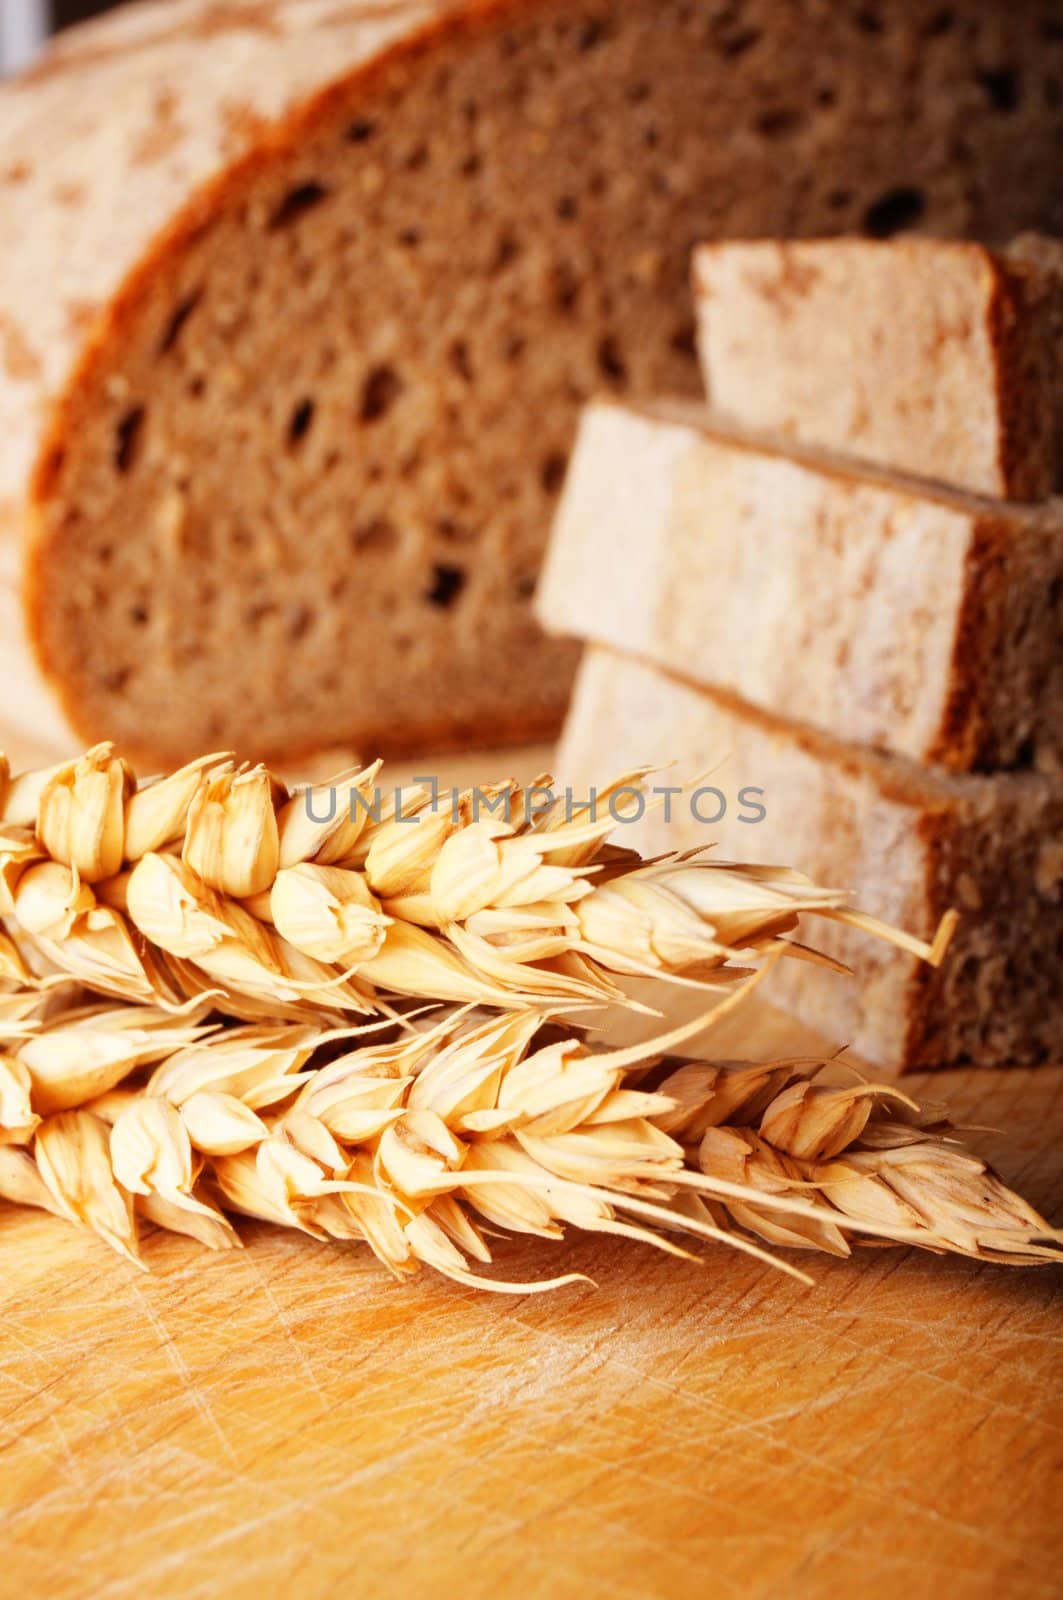 bread and grain or cereal showing food baker or bakery concept